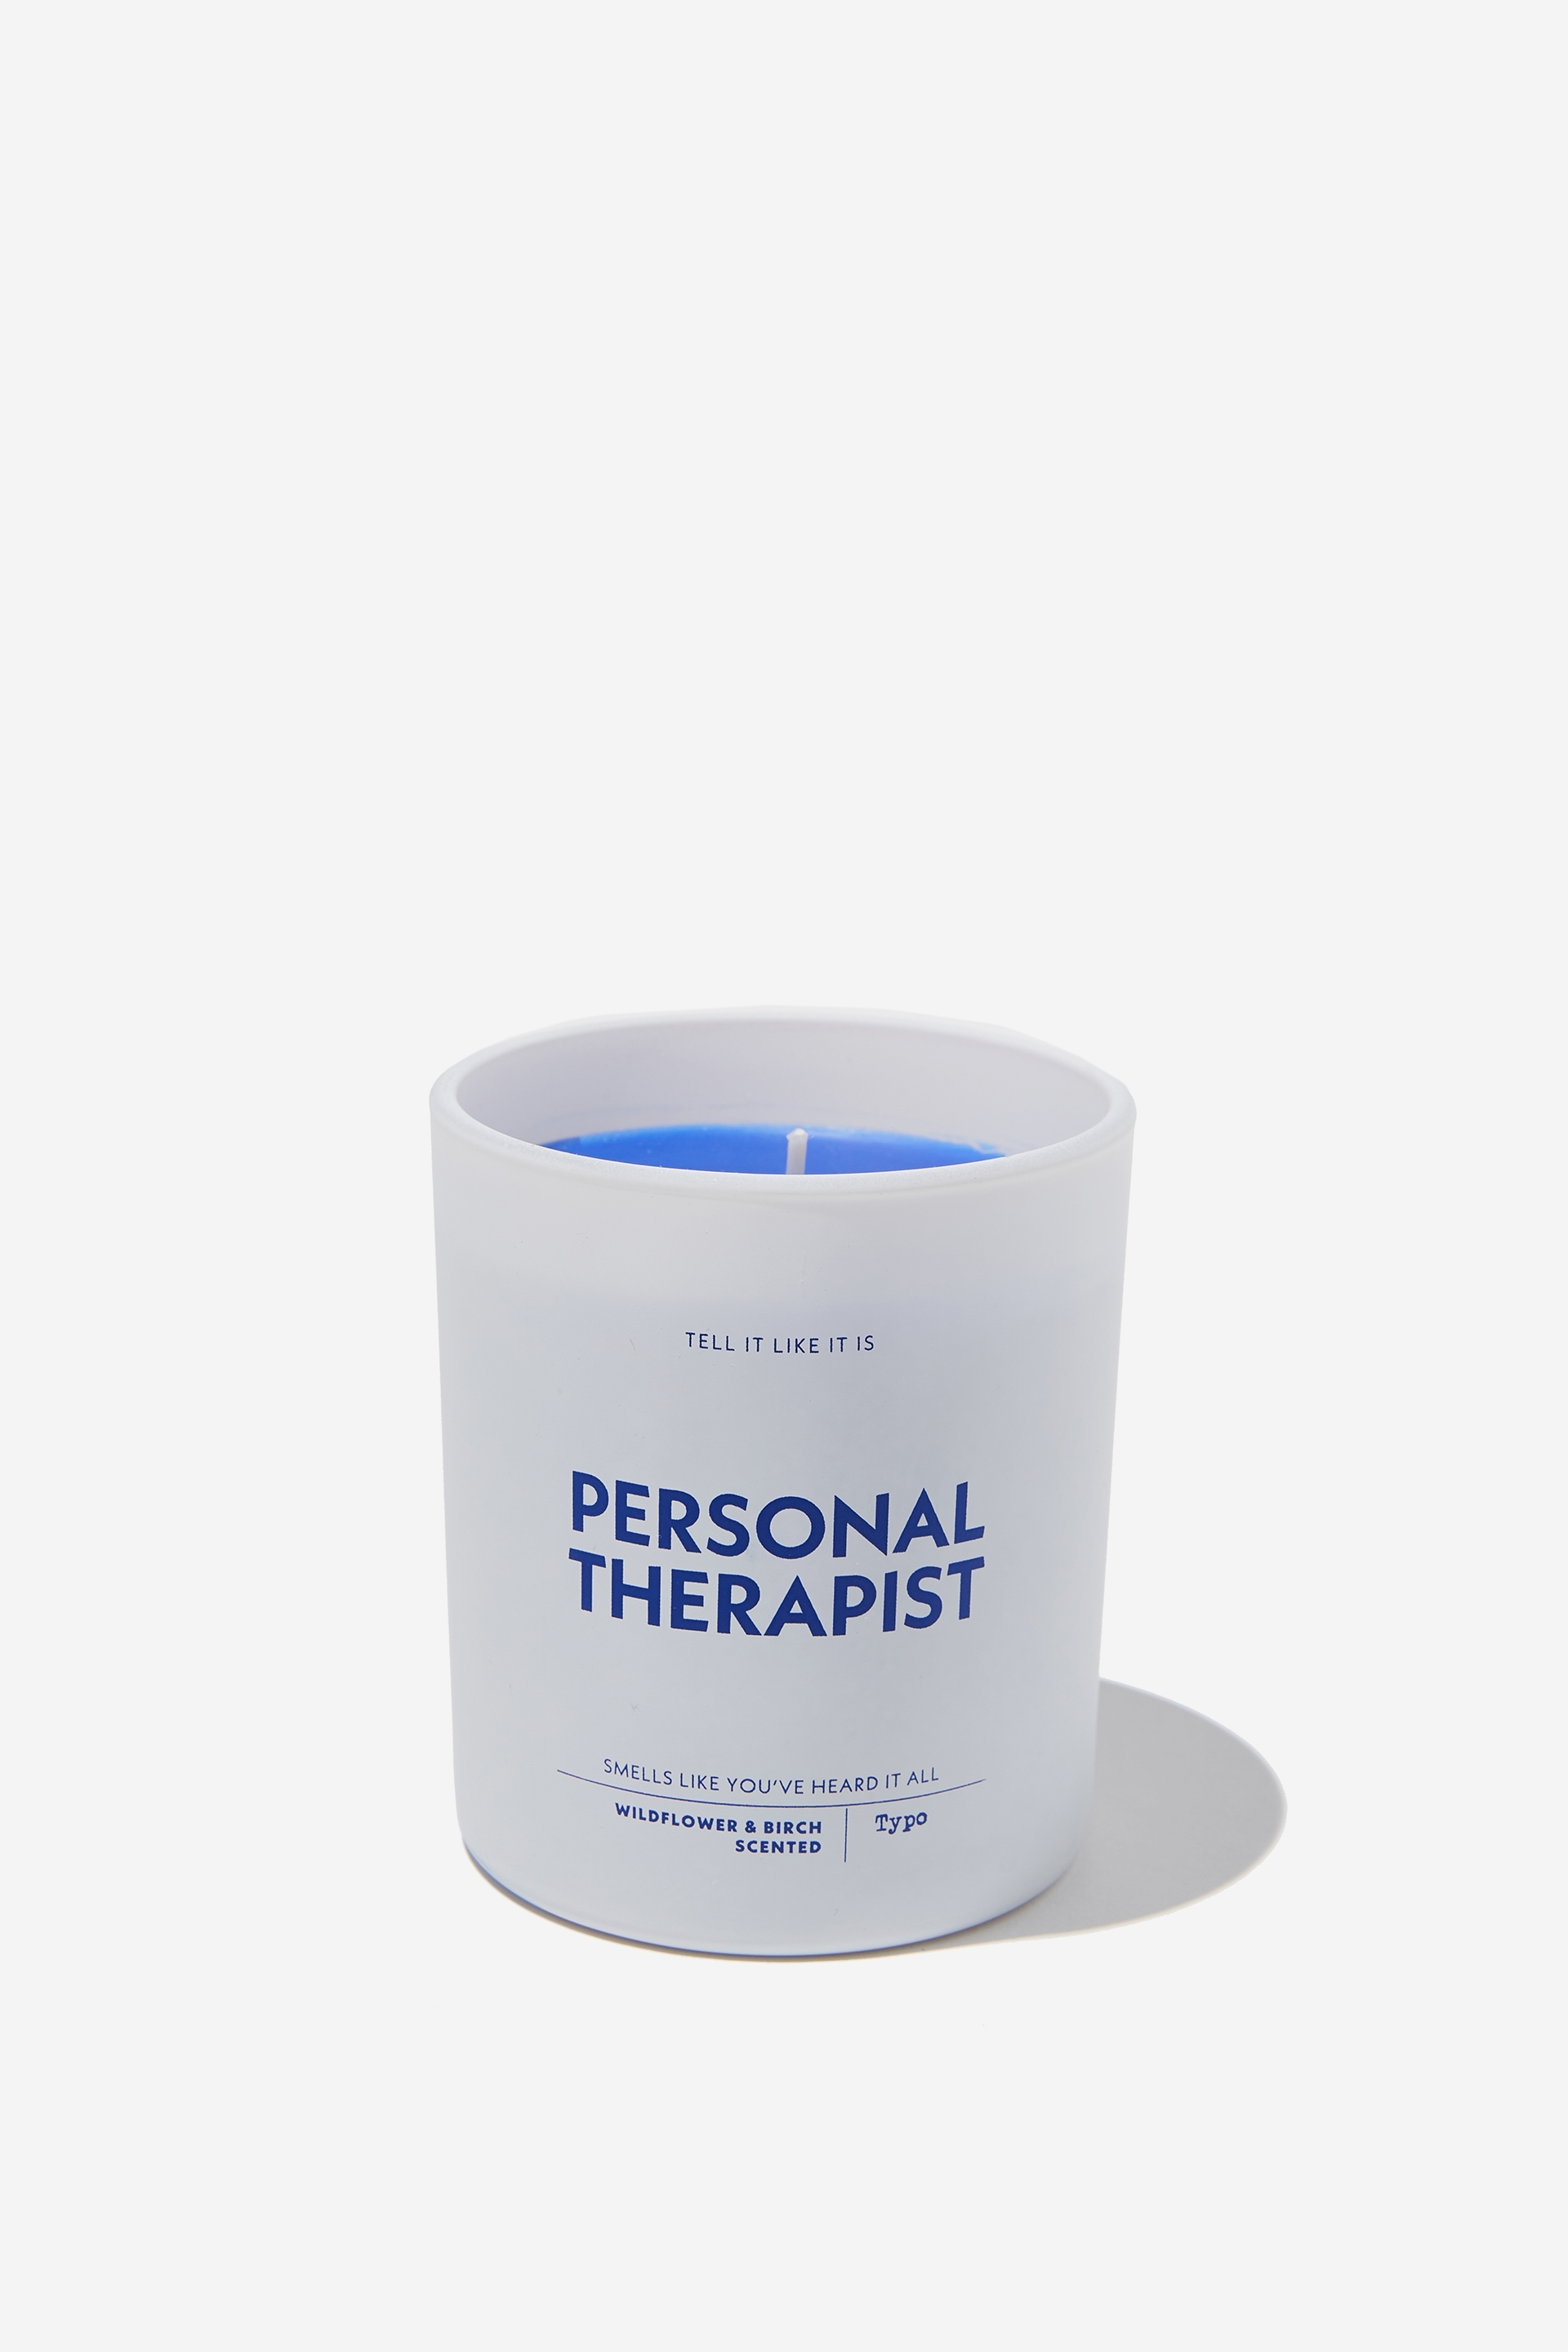 Typo - Tell It Like It Is Candle - Ultra blue personal therapist